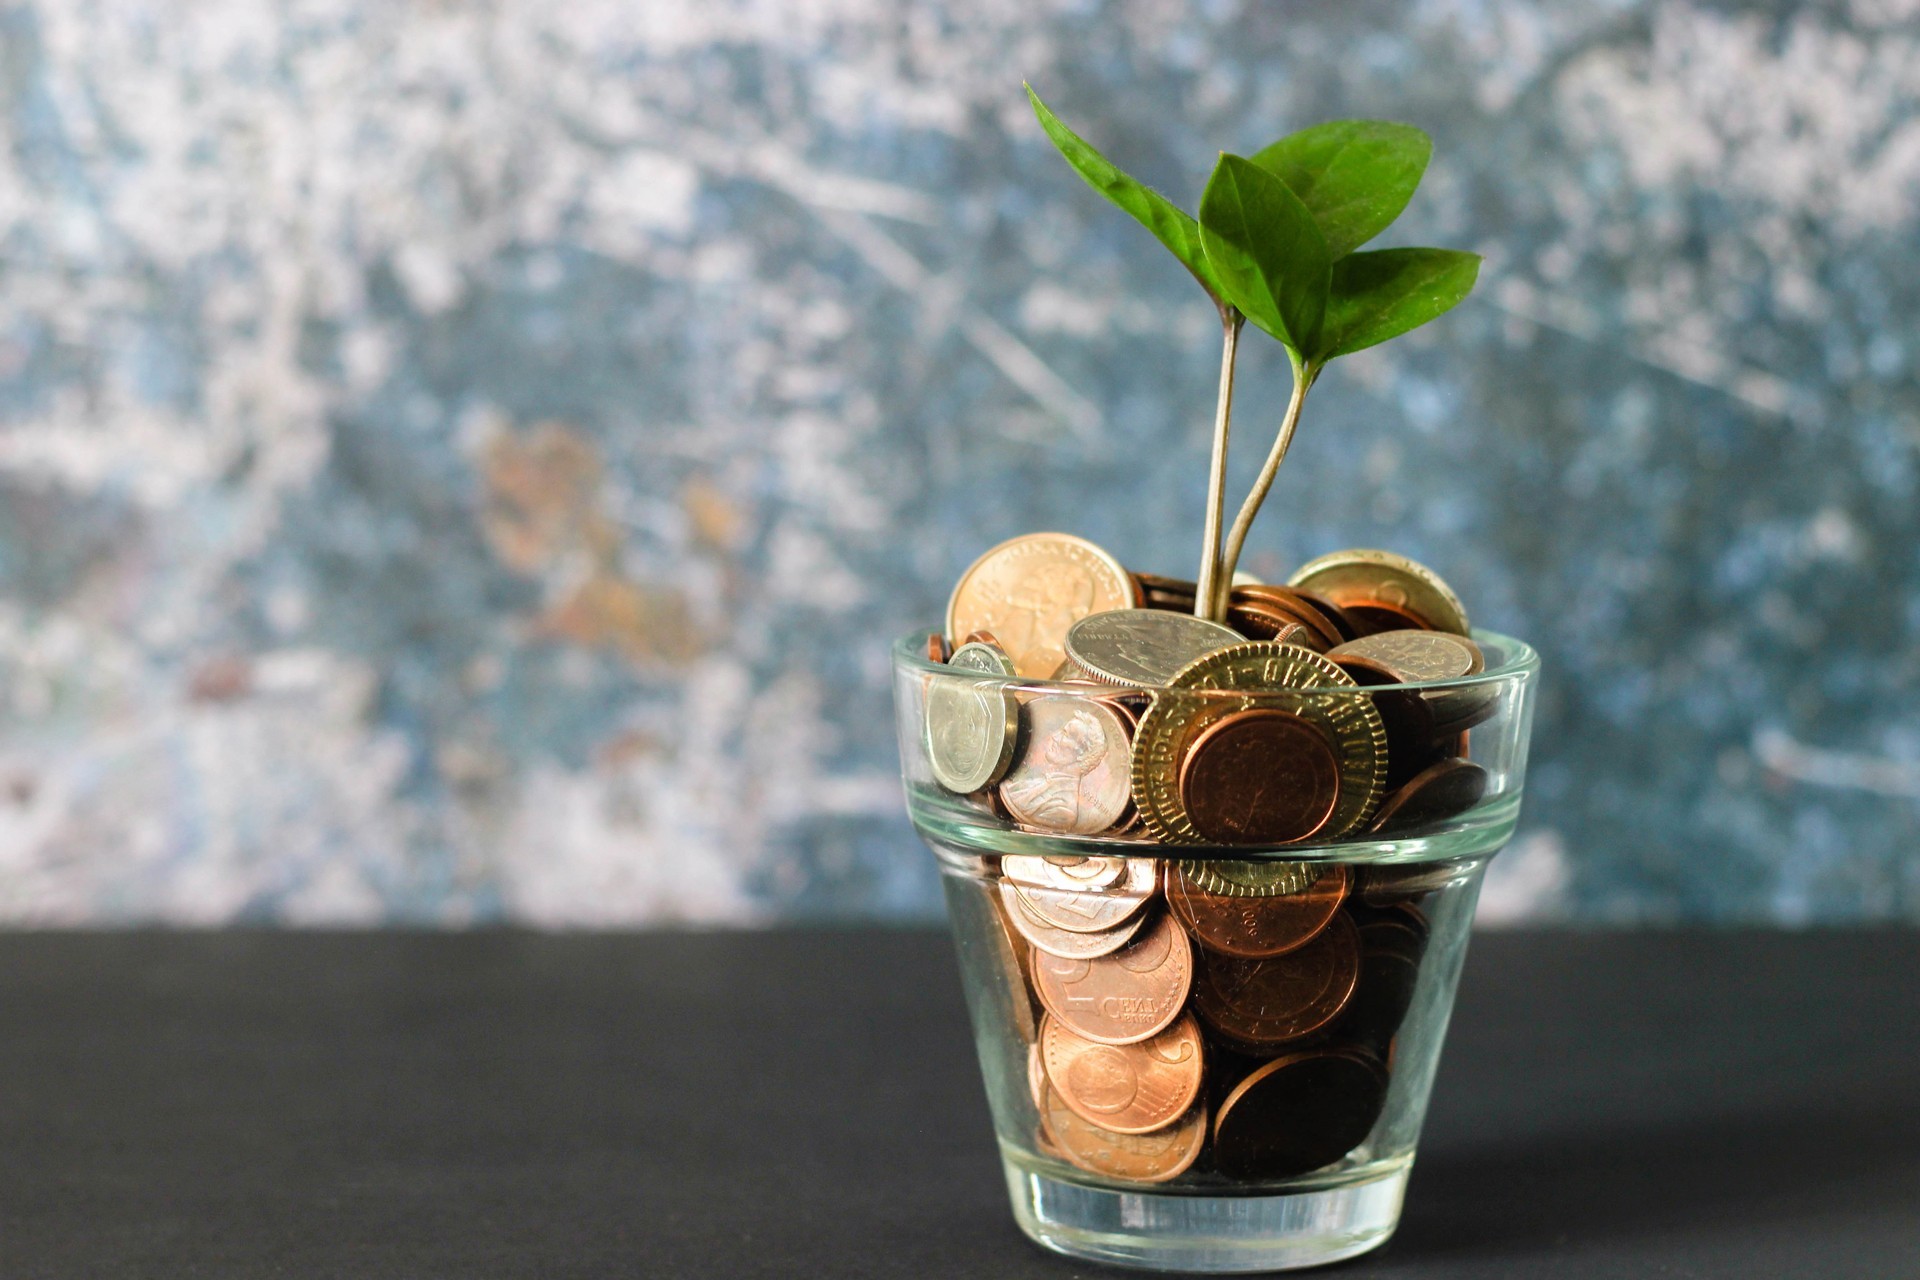 5 Ways To Raise Funds For A Startup